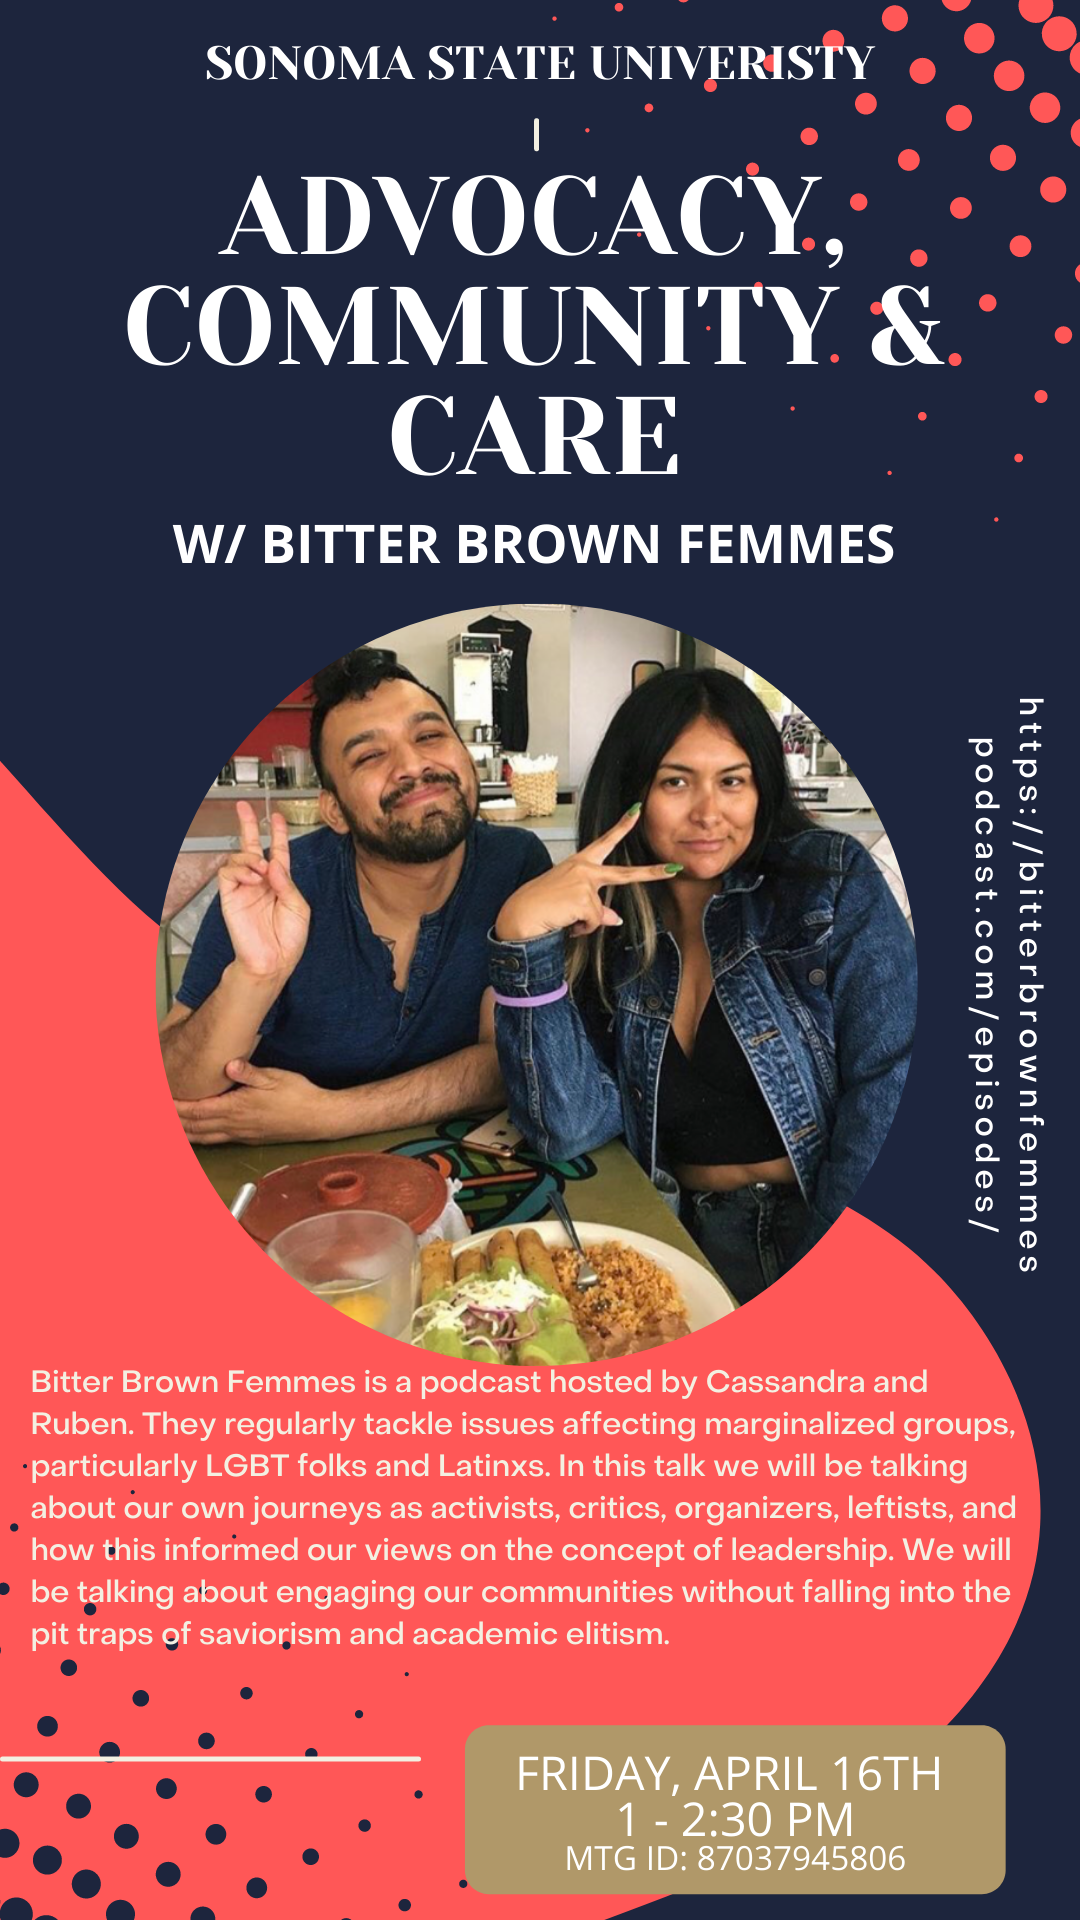 The event flyer for 'Advocacy, Community & Care' episode of the Bitter Brown Femmes podcast featuring an image of the podcast hosts posing together